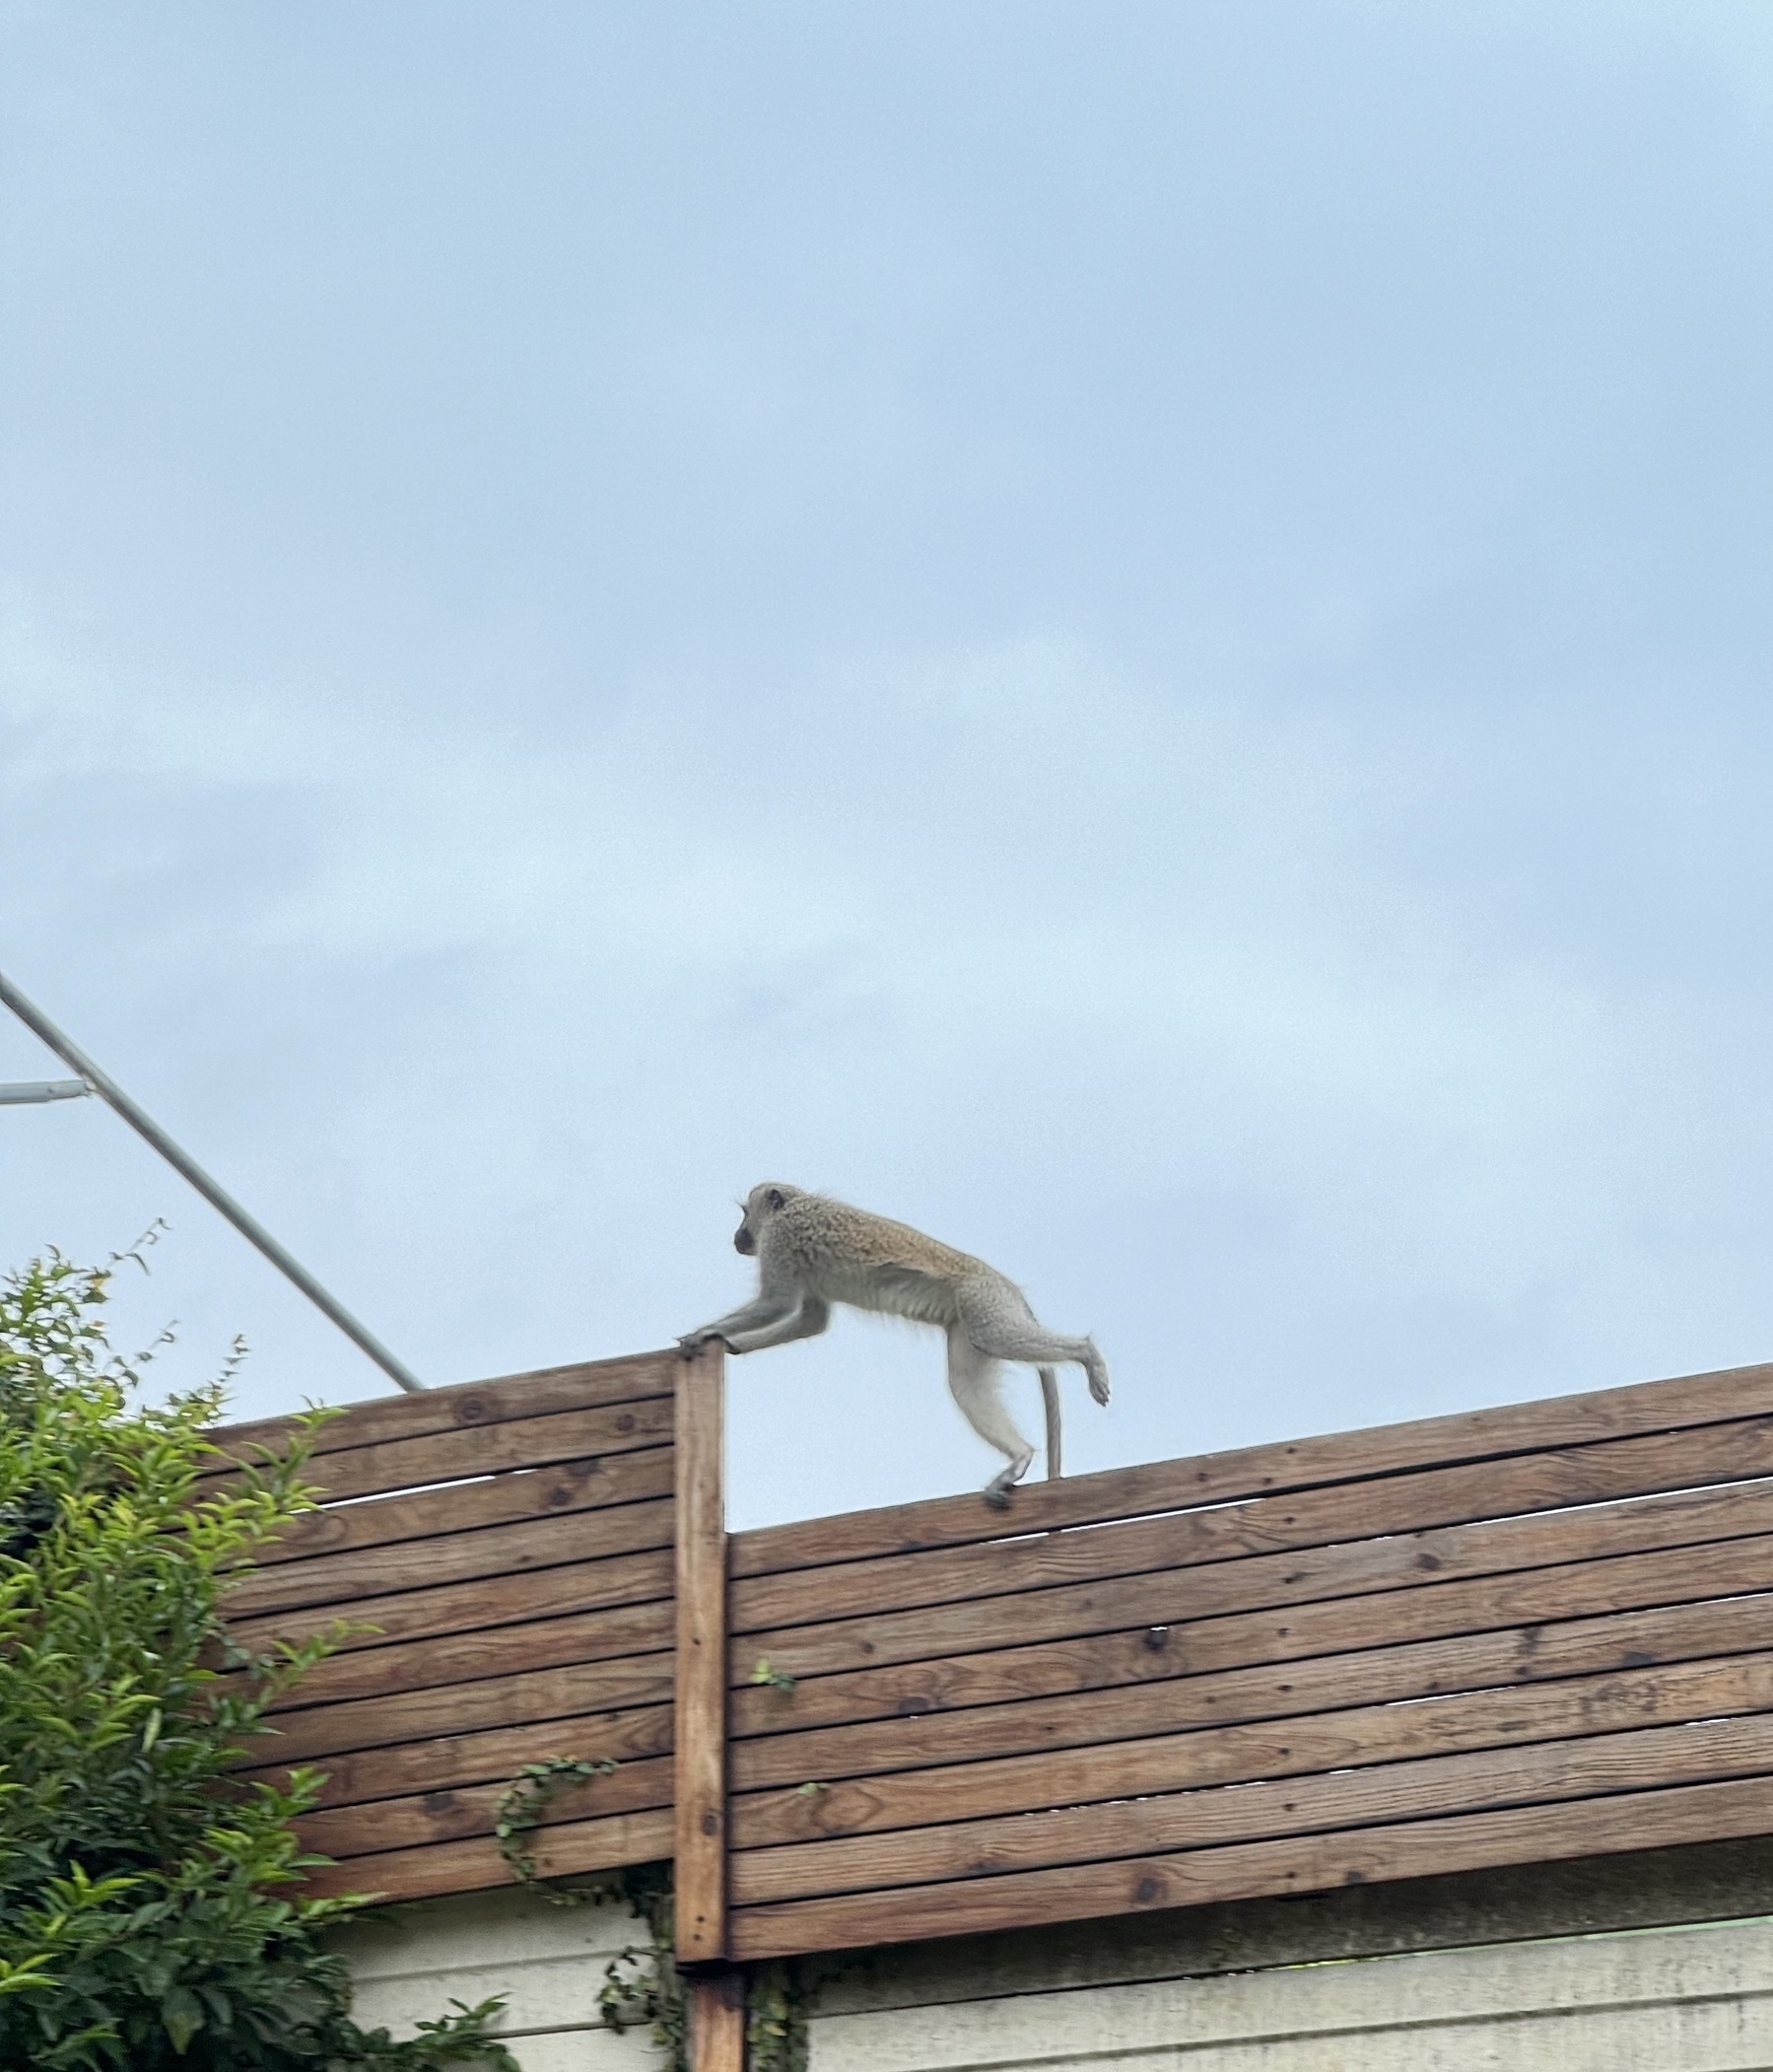 A small monkey leaping across a wooden fence.